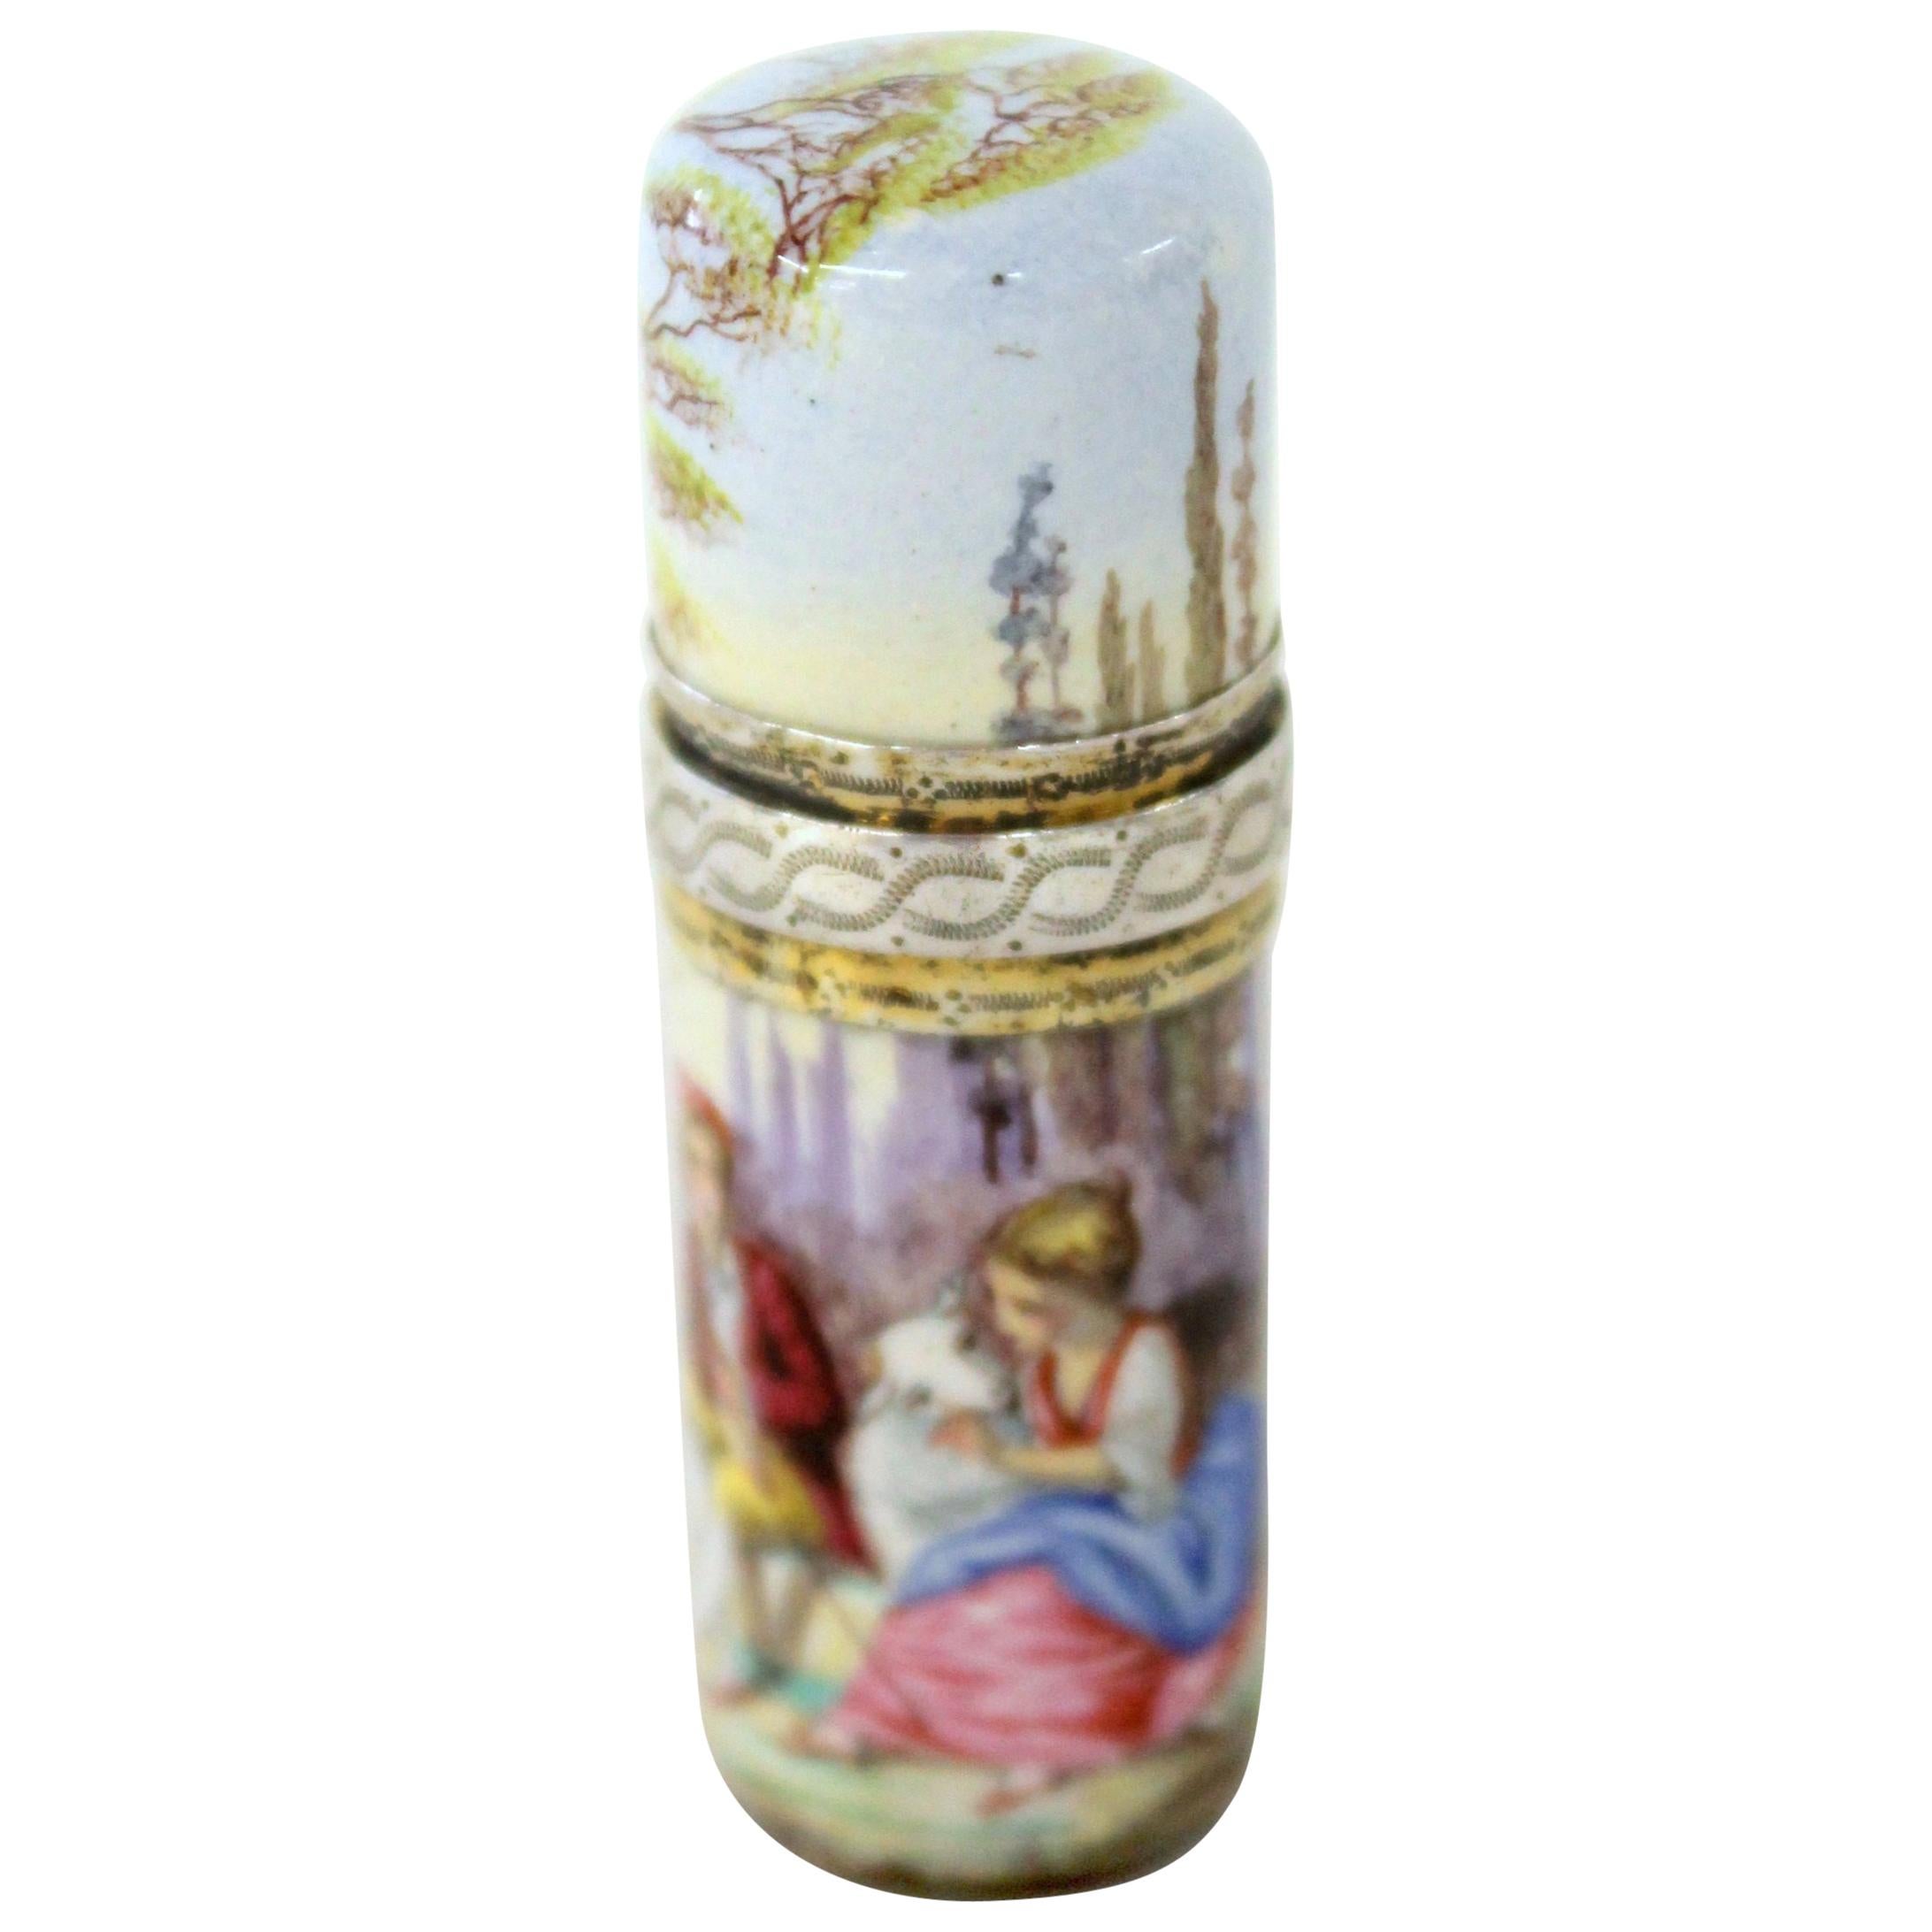 Antique French Hand-Painted Enamel .800 Fine Silver "Lipstick" Perfume Bottle For Sale